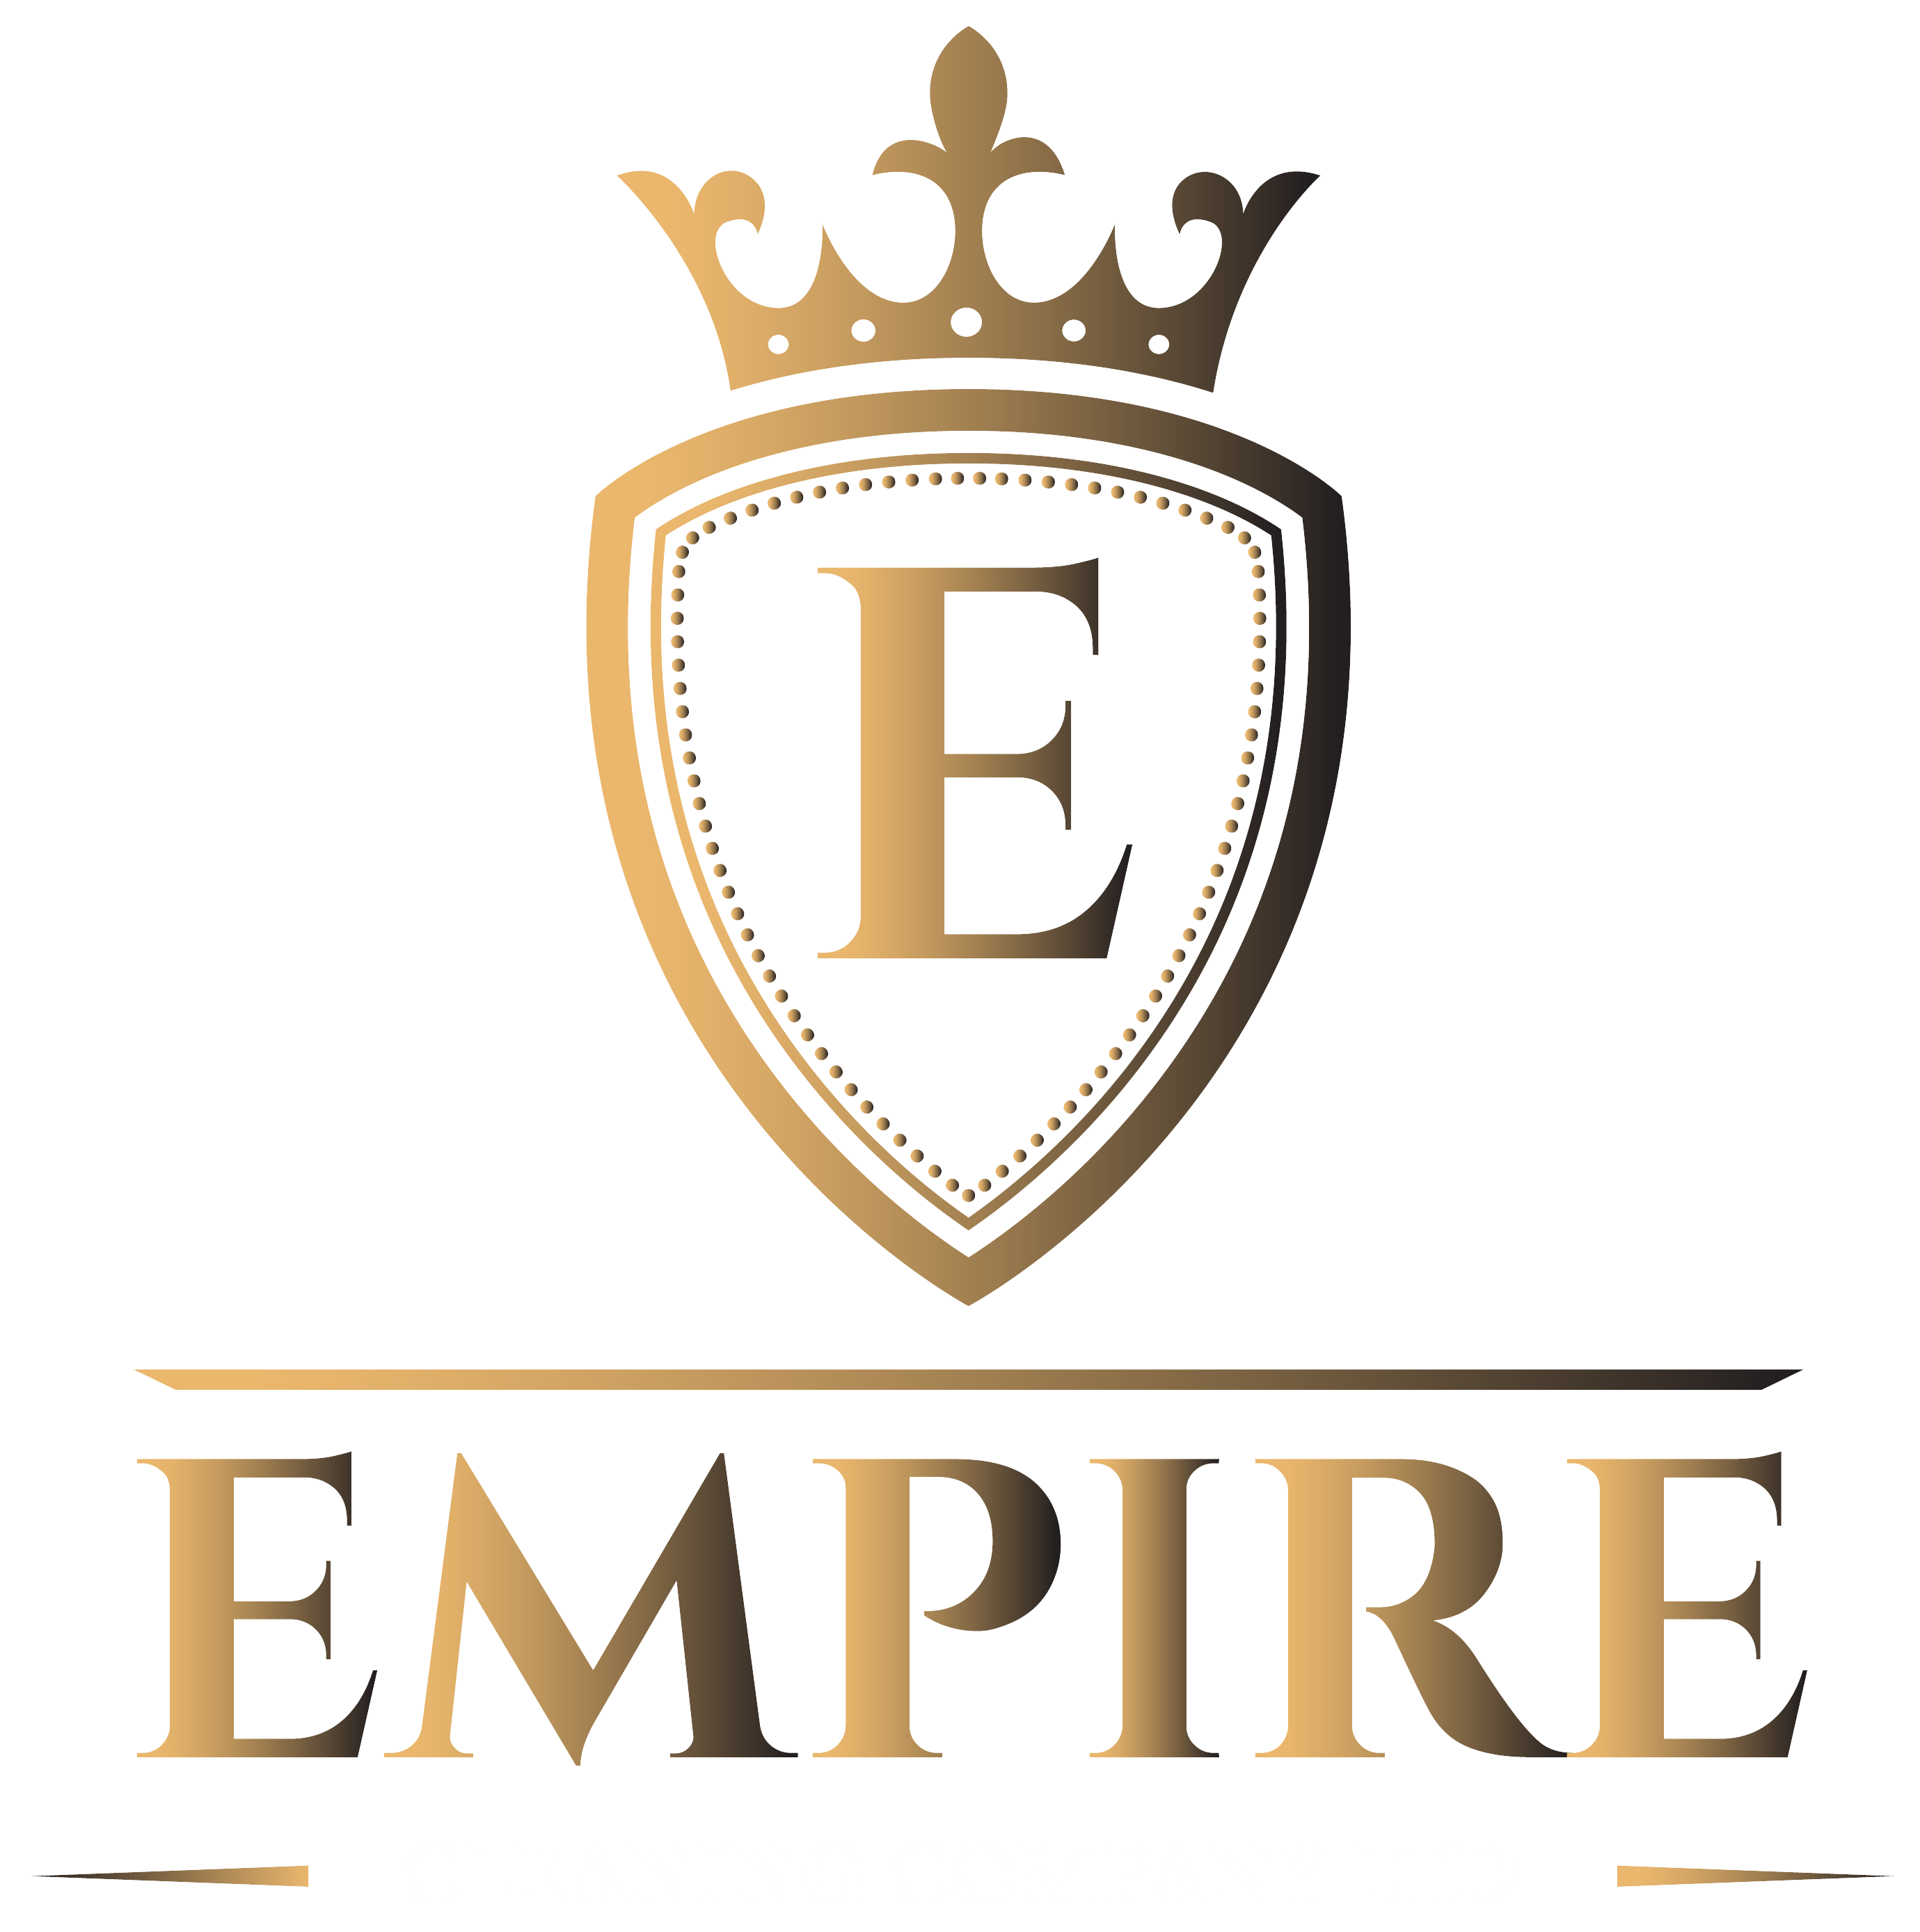 Empire Cleaning